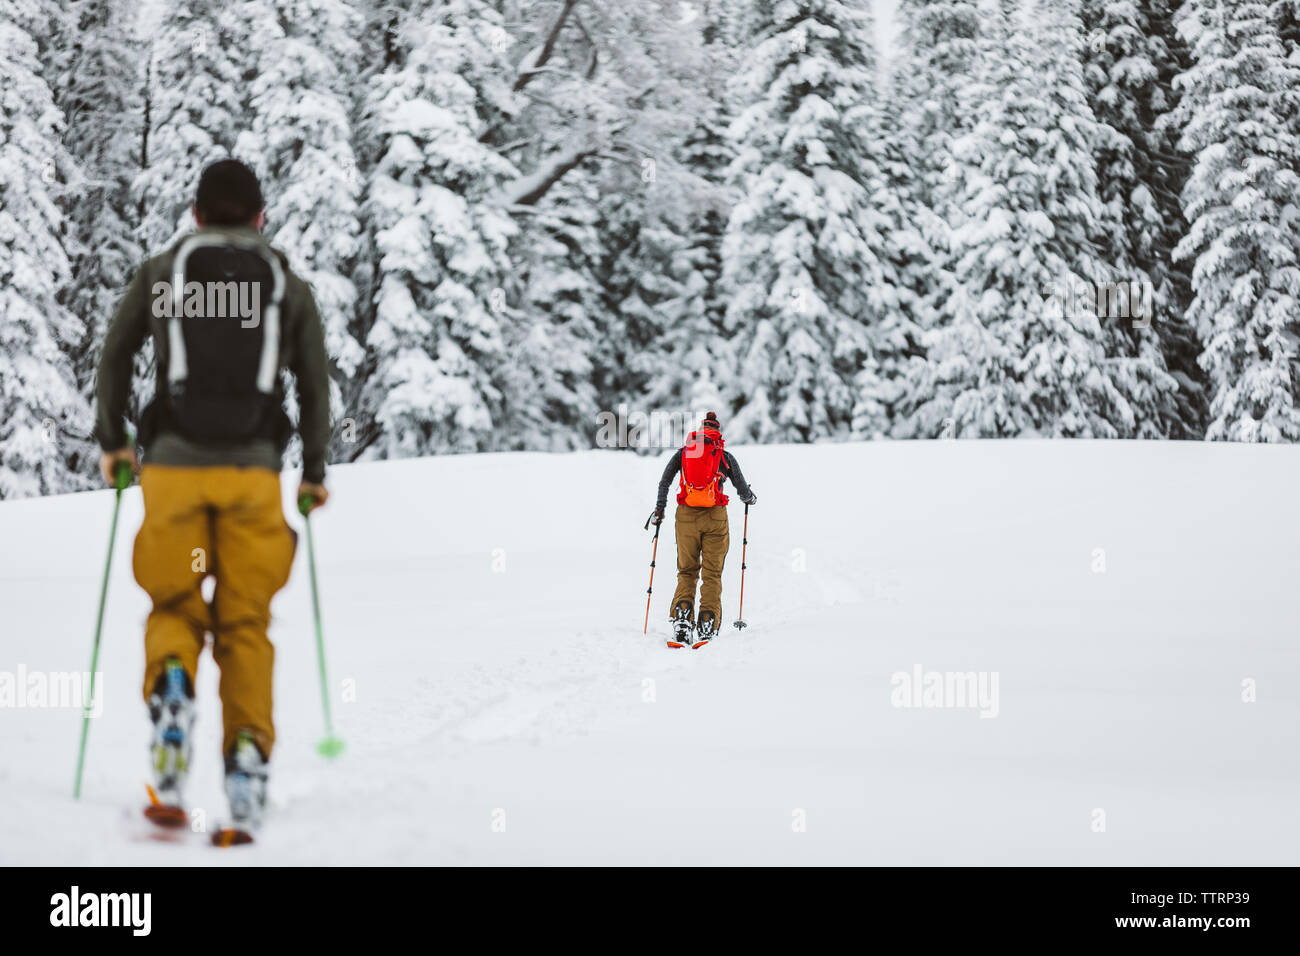 couple of skiers make their way across snowy field with pine trees Stock Photo